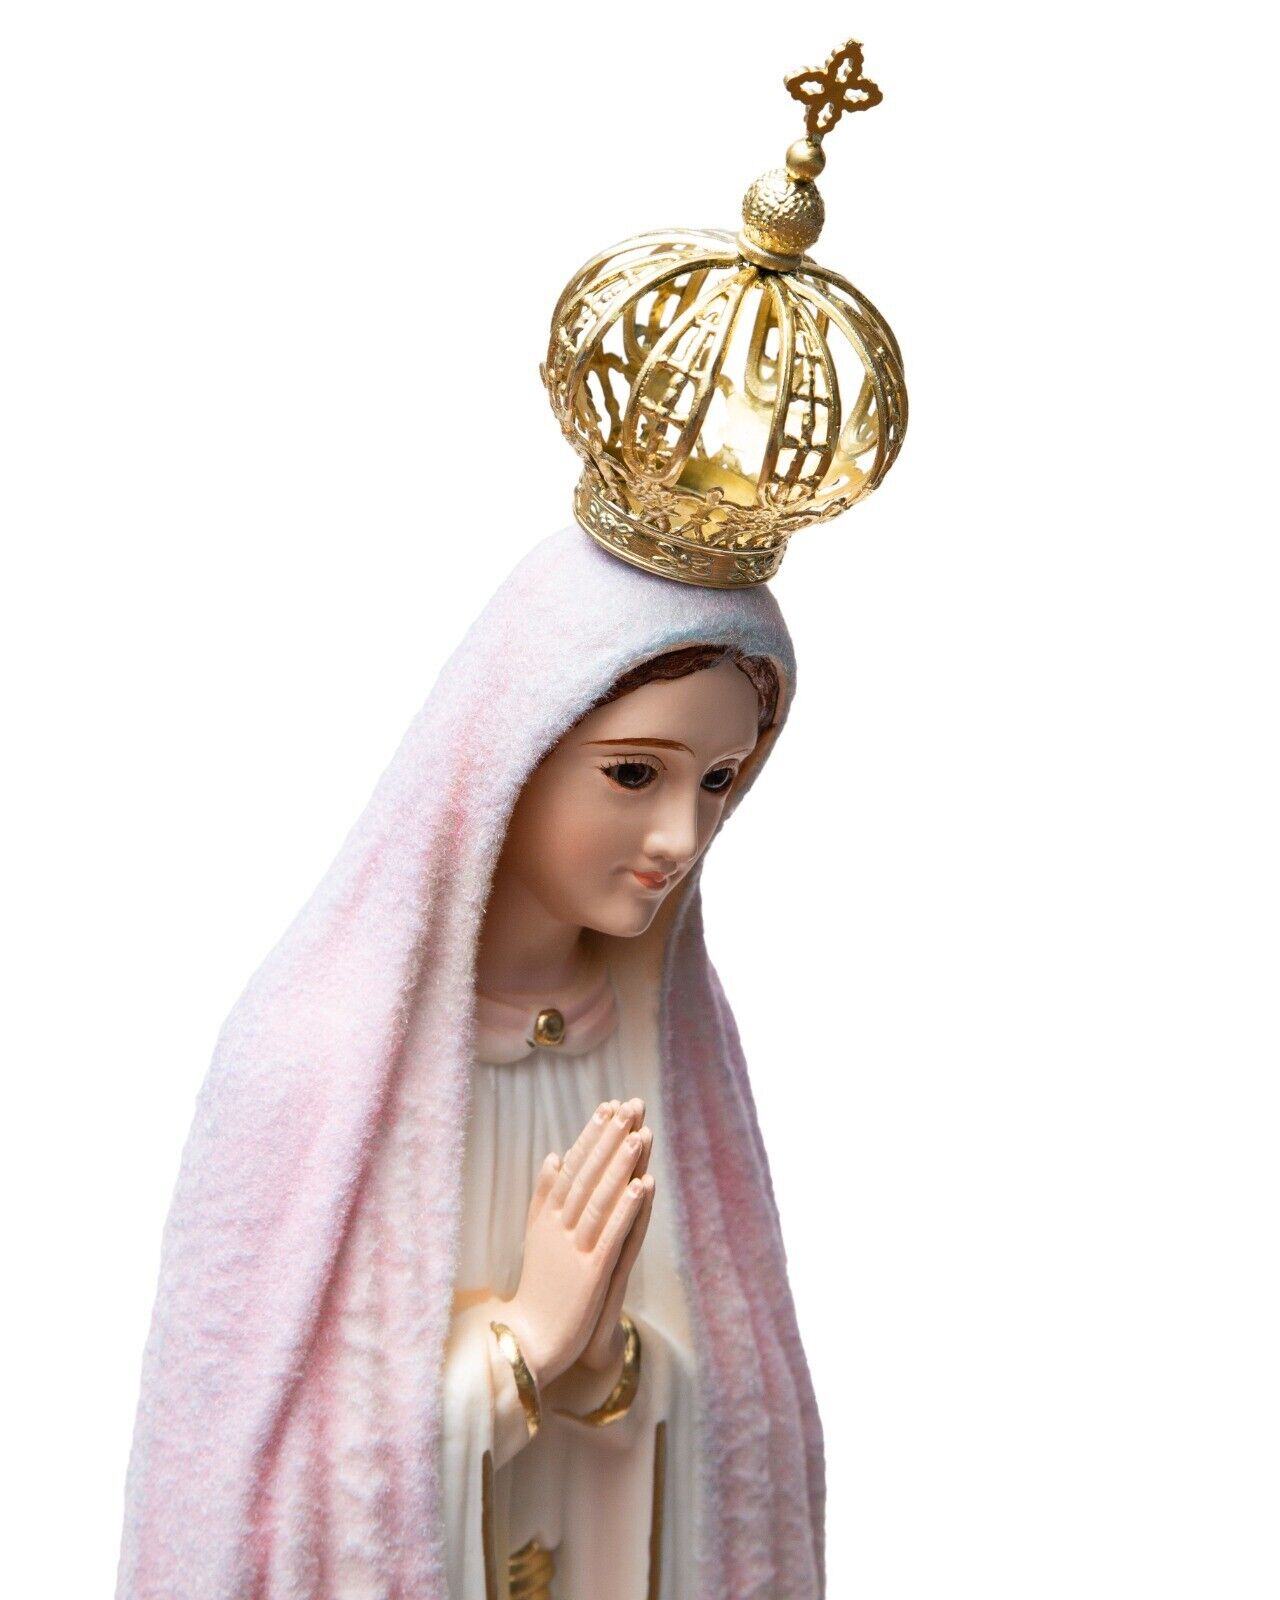 Our Lady Of Fatima Virgin Mary, Statue Change the Color with Time 19.7 Inch